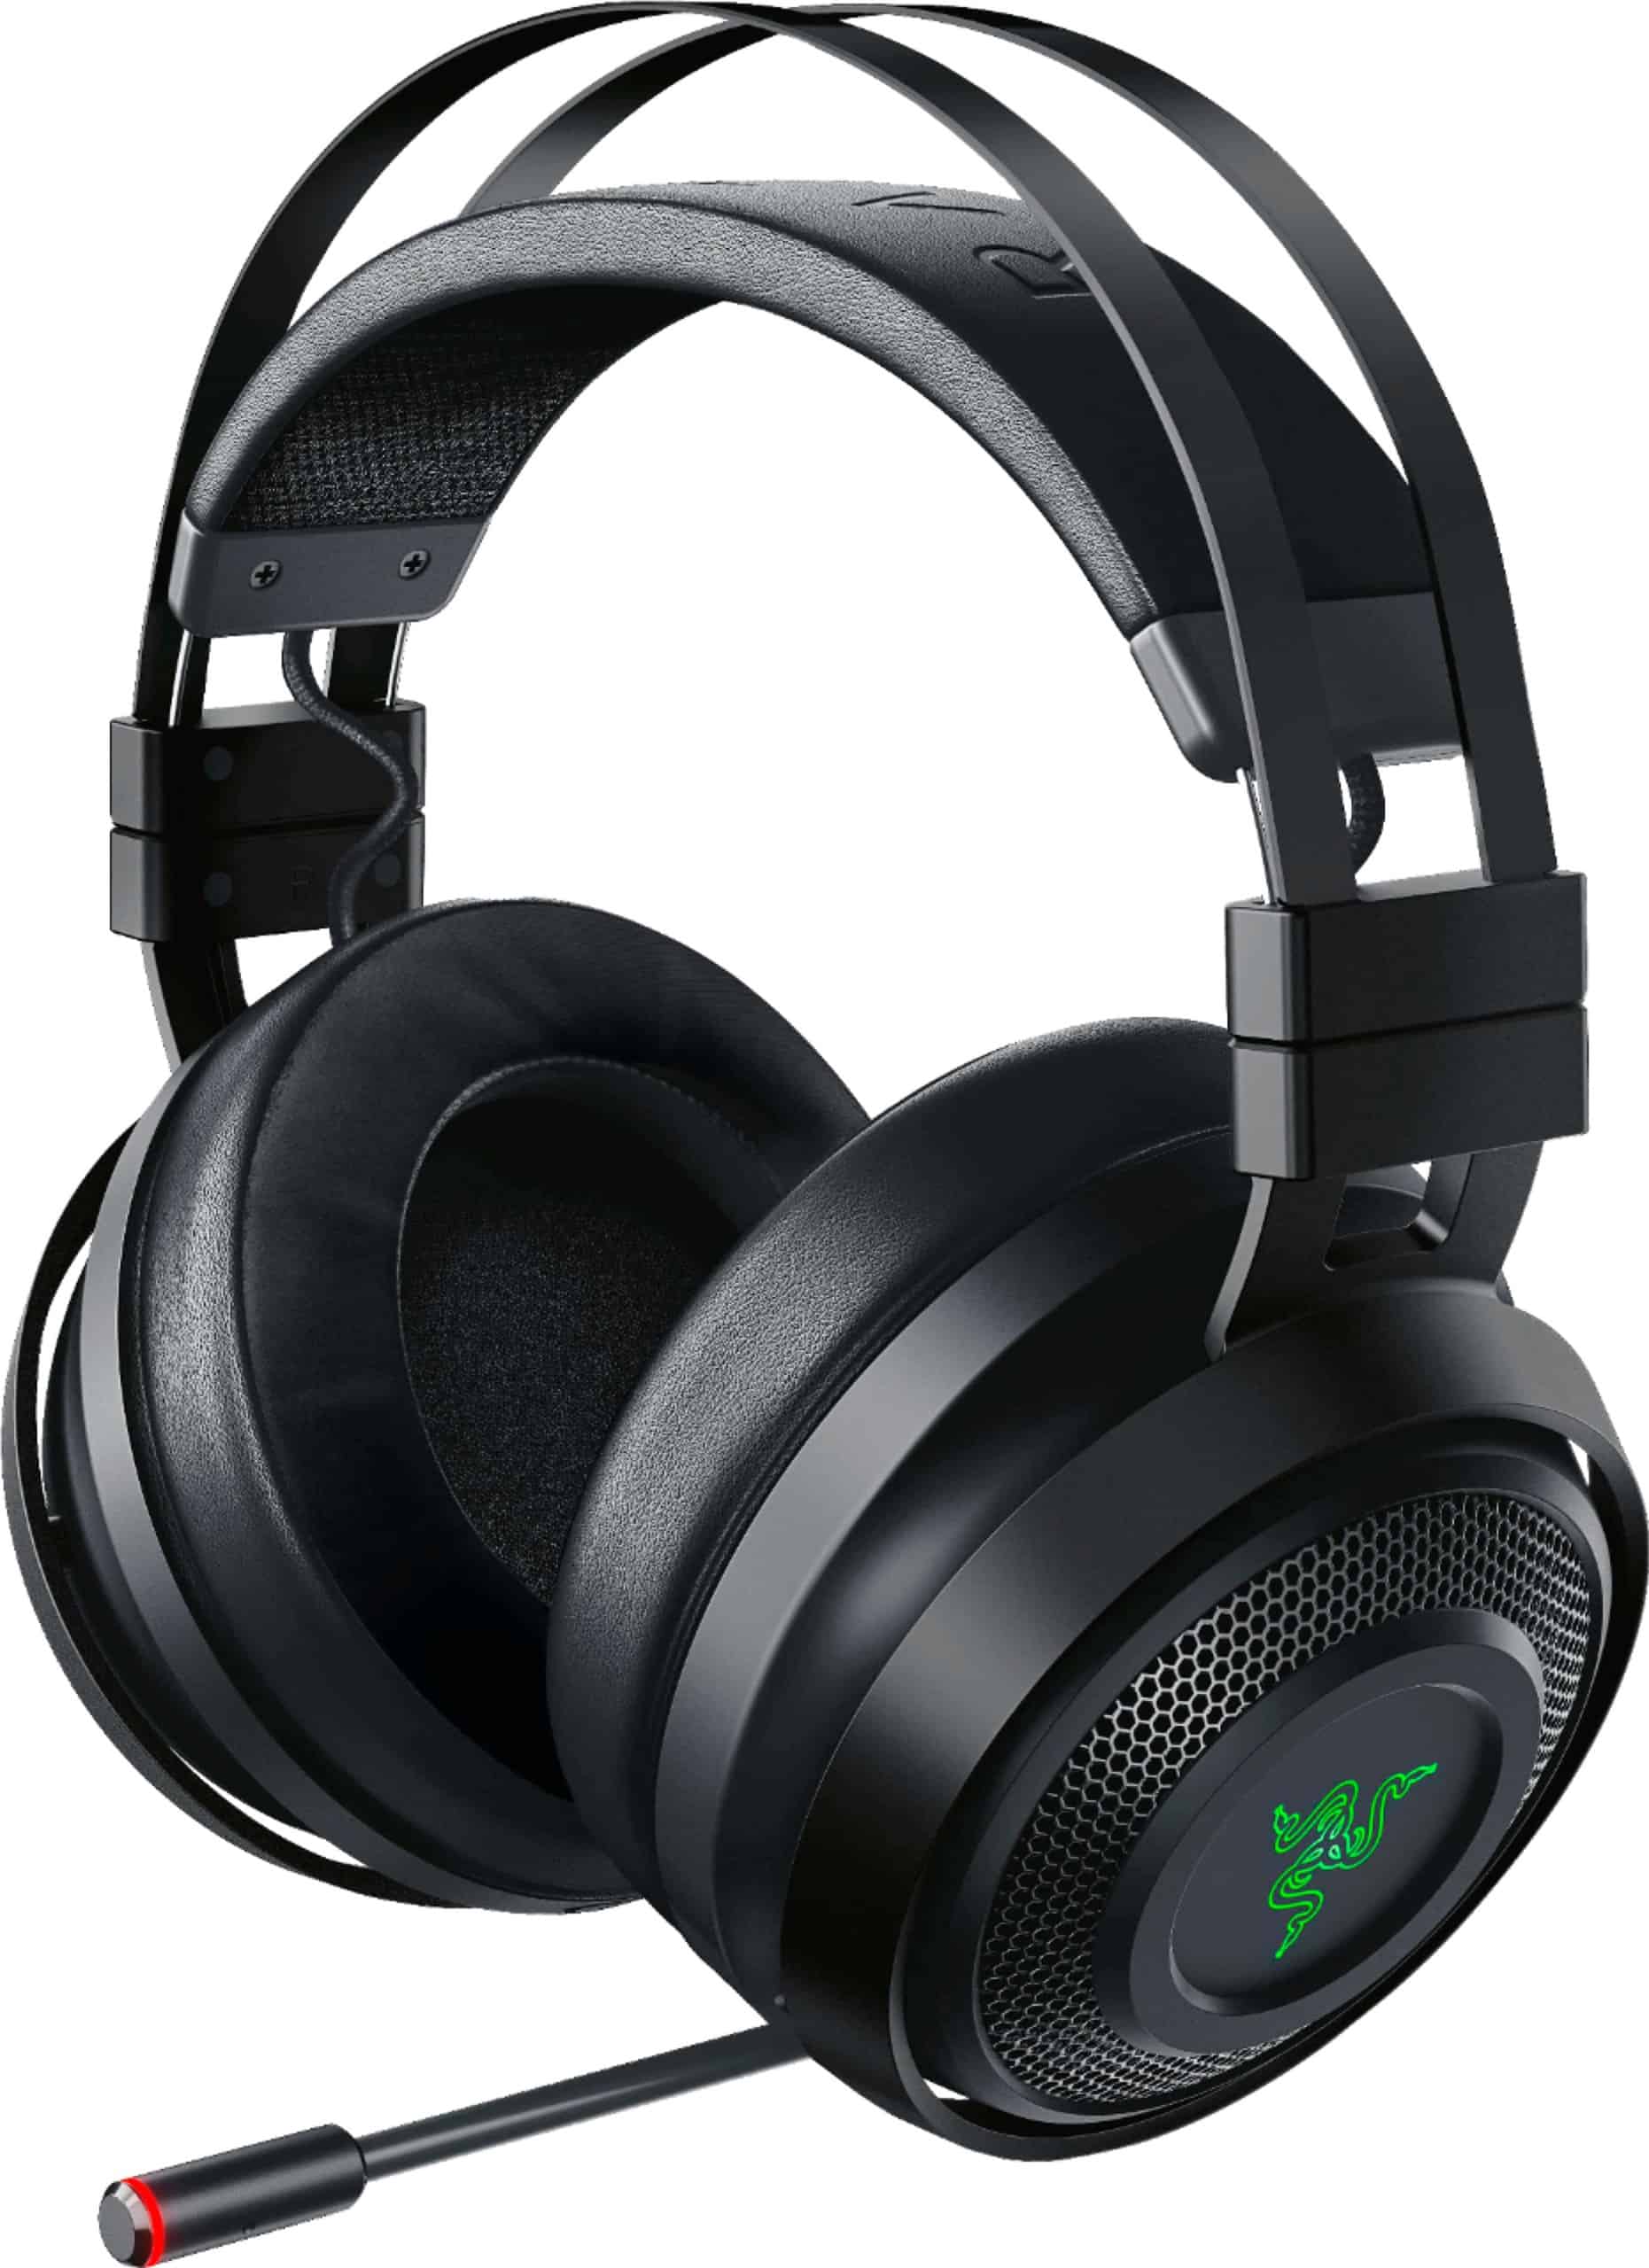 Razer Nari Ultimate Wireless Gaming Headset Gives $70 Discount